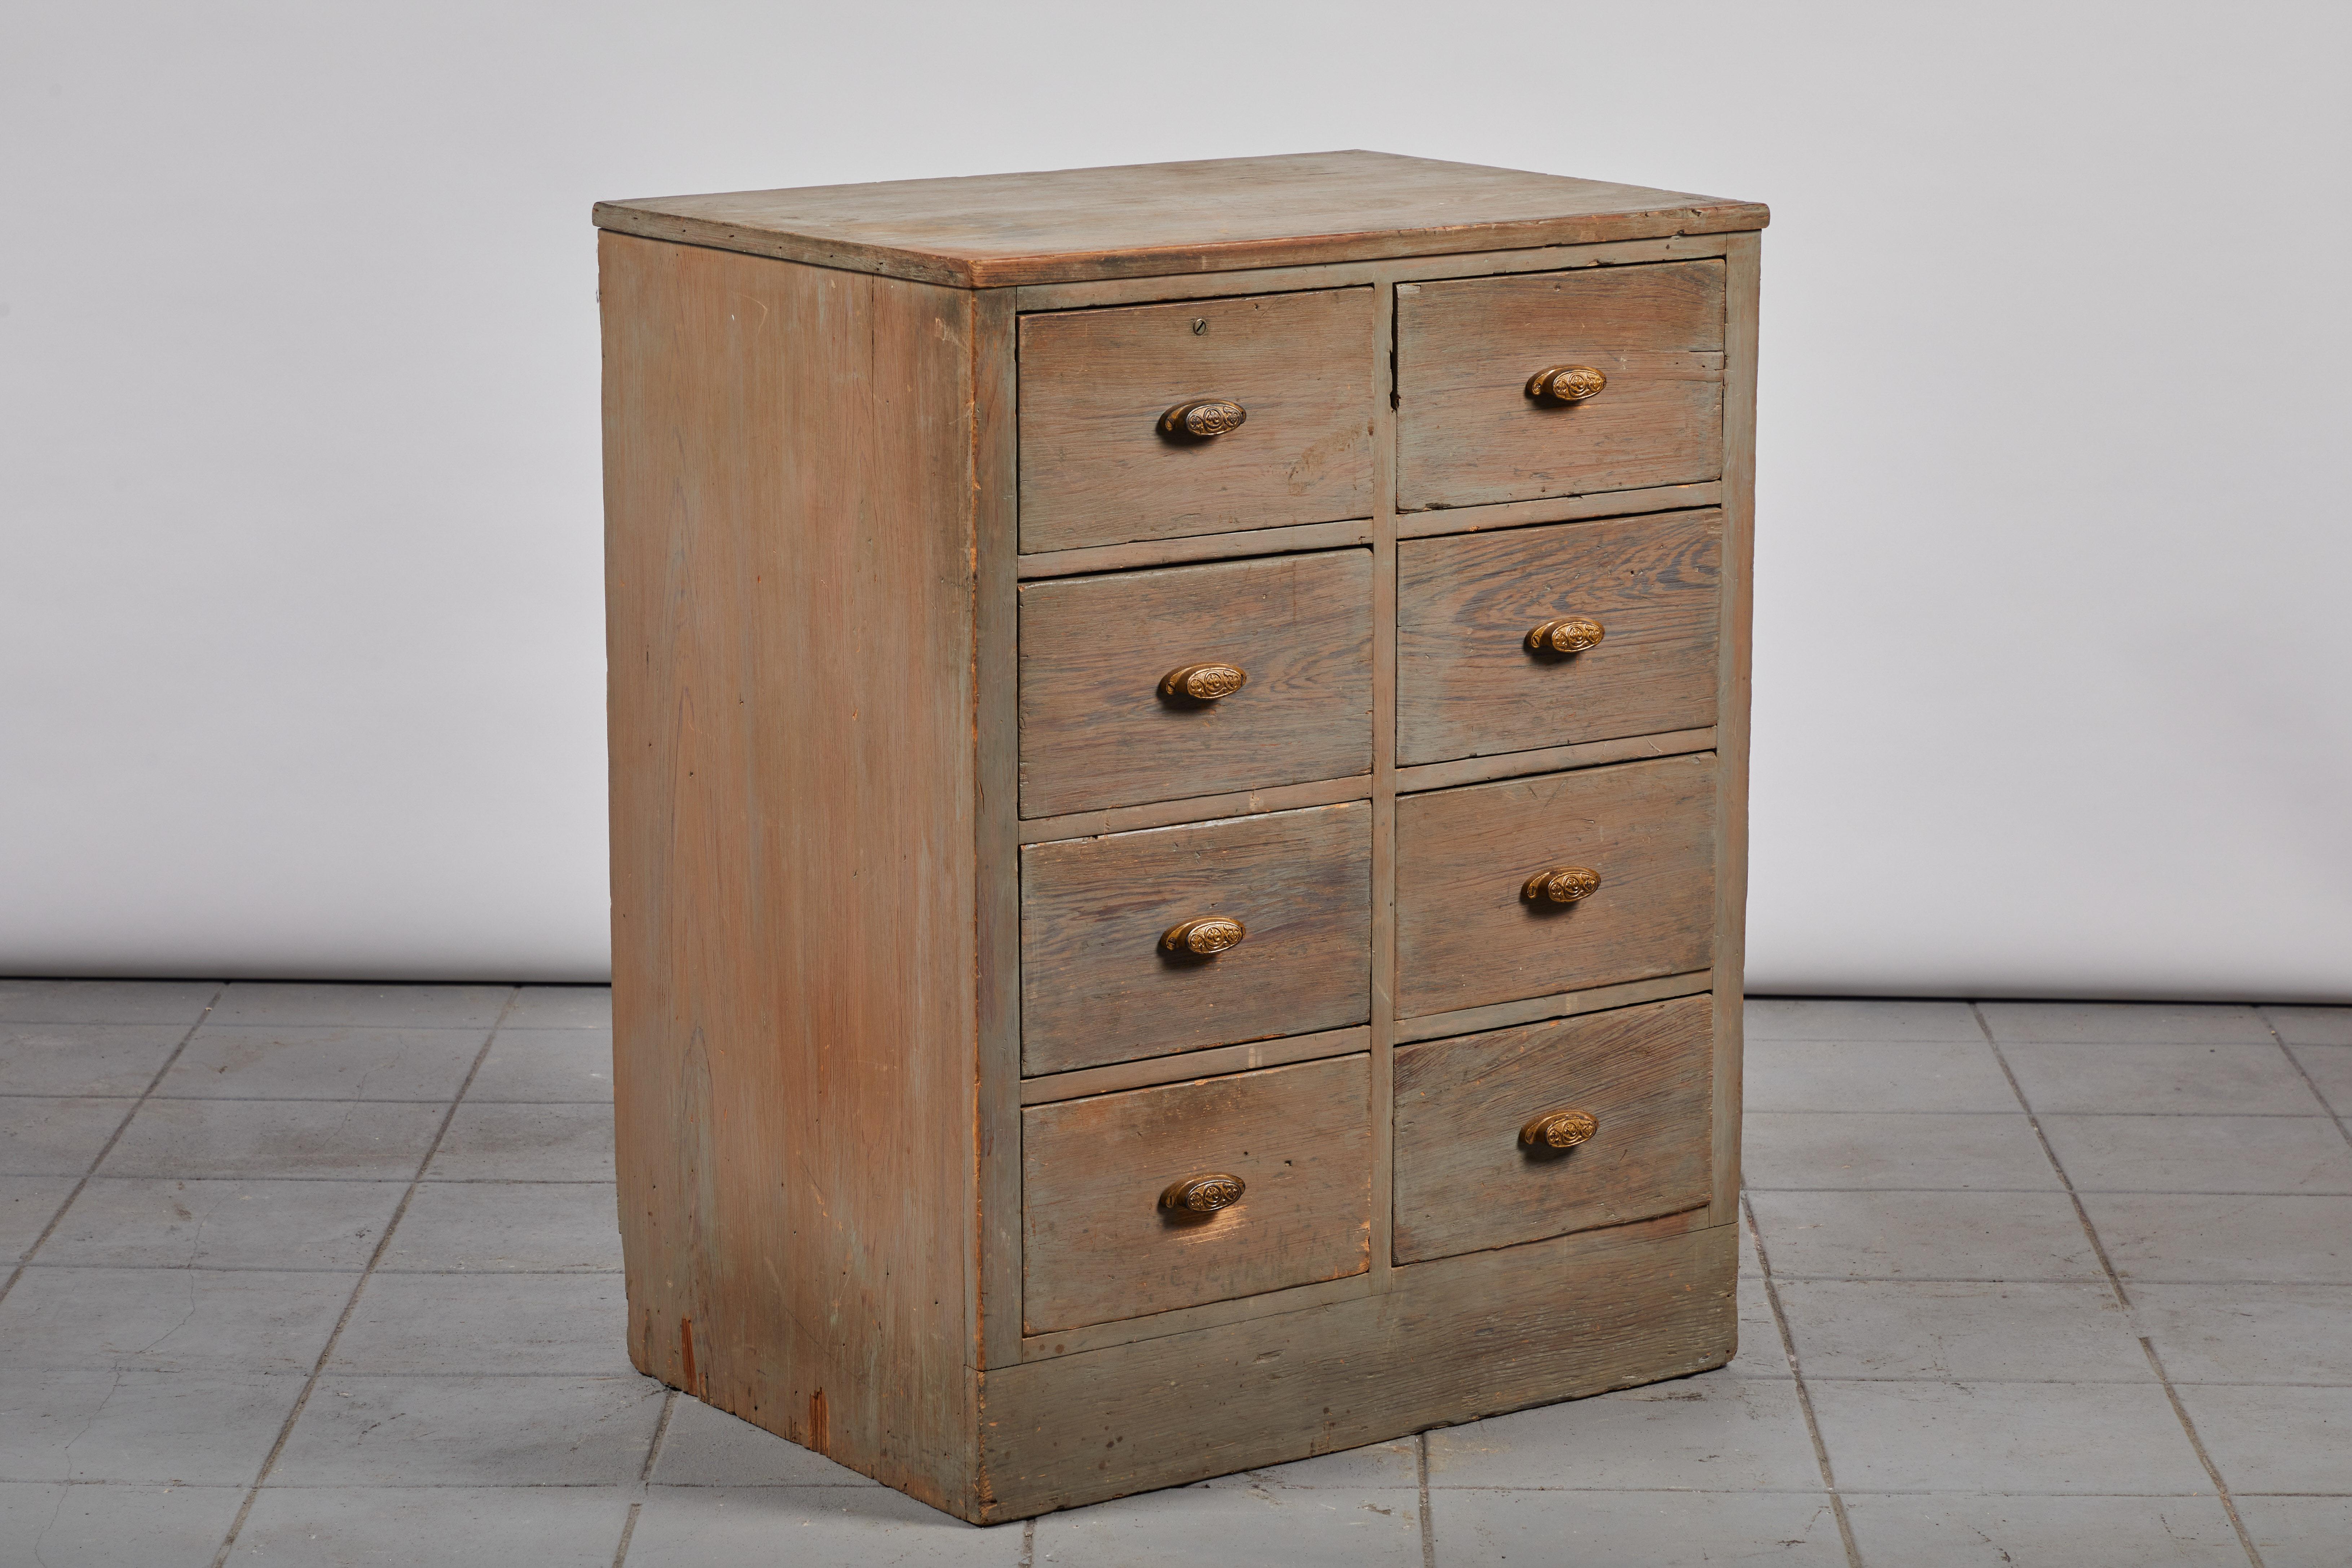 Wood Early American Eight-Drawer Painted Dresser